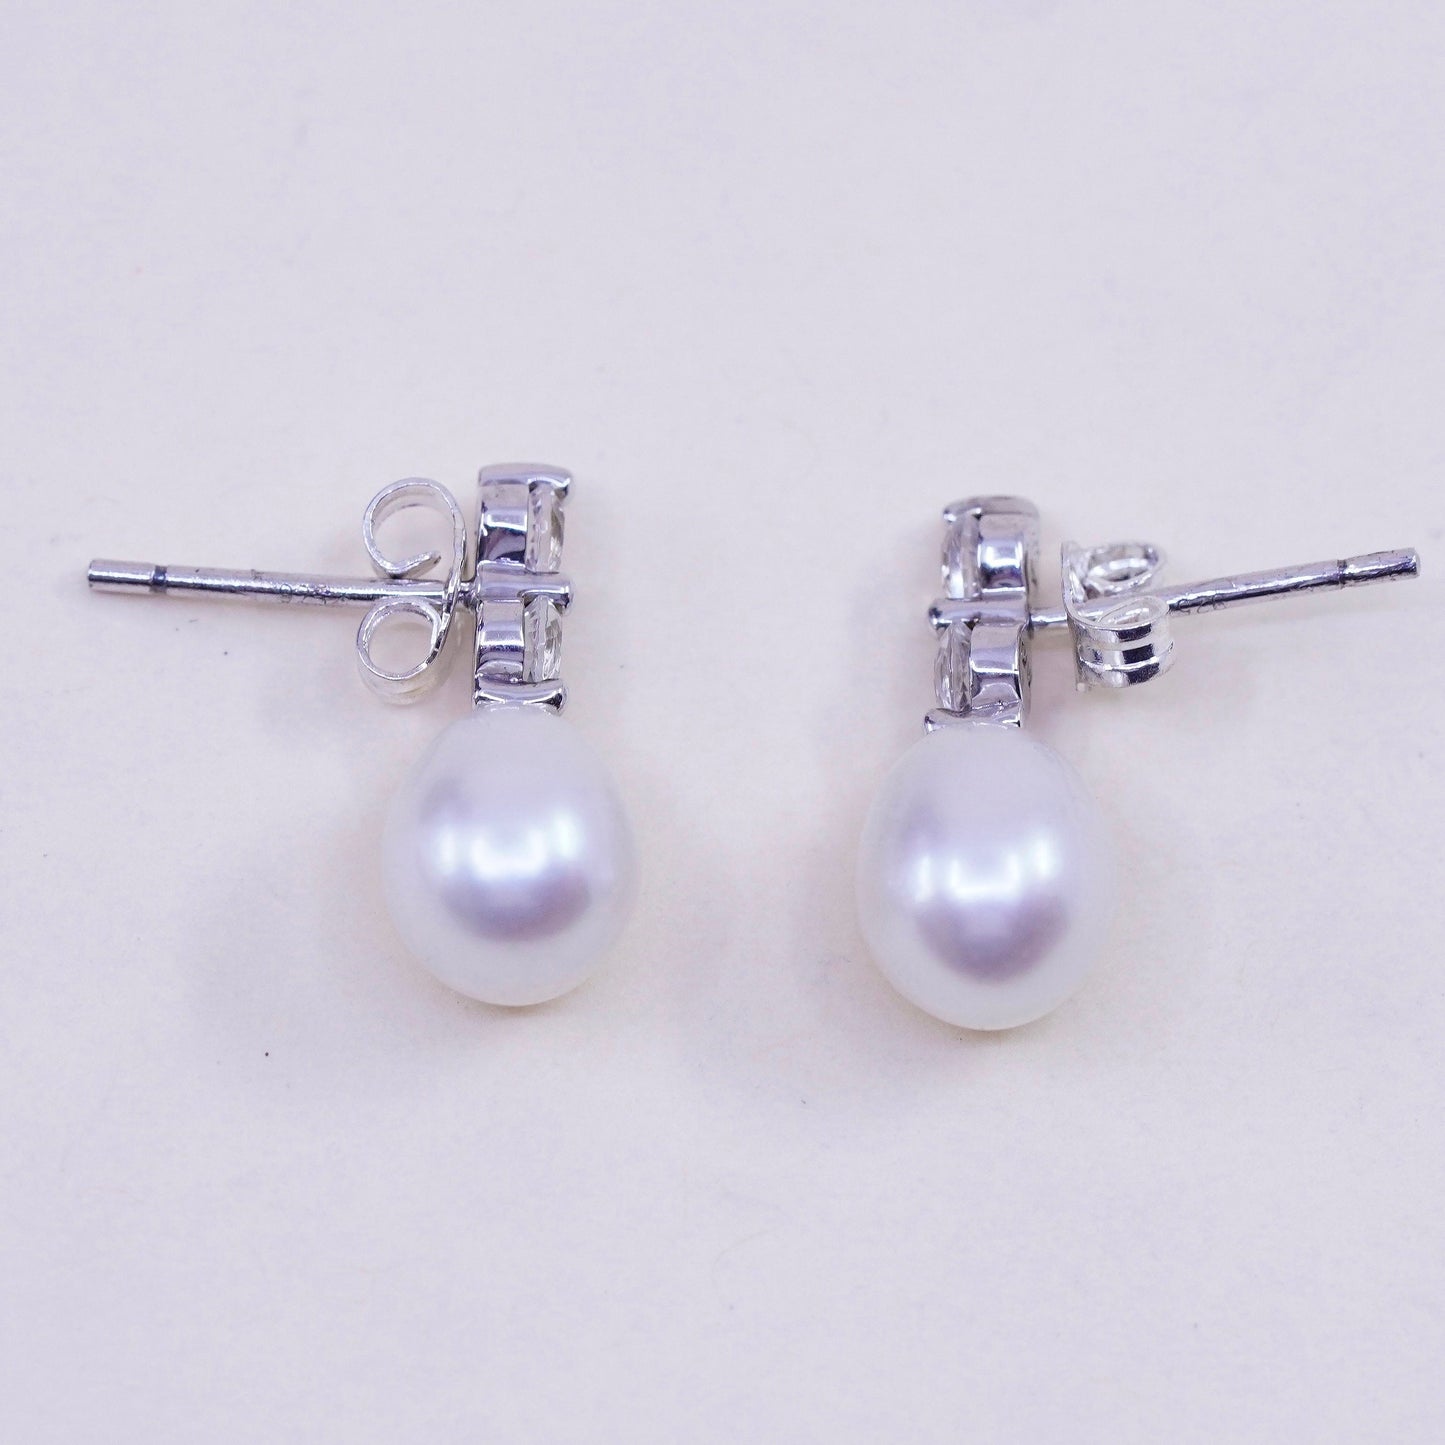 Vintage sterling silver earrings, 925 studs with pearl and cz